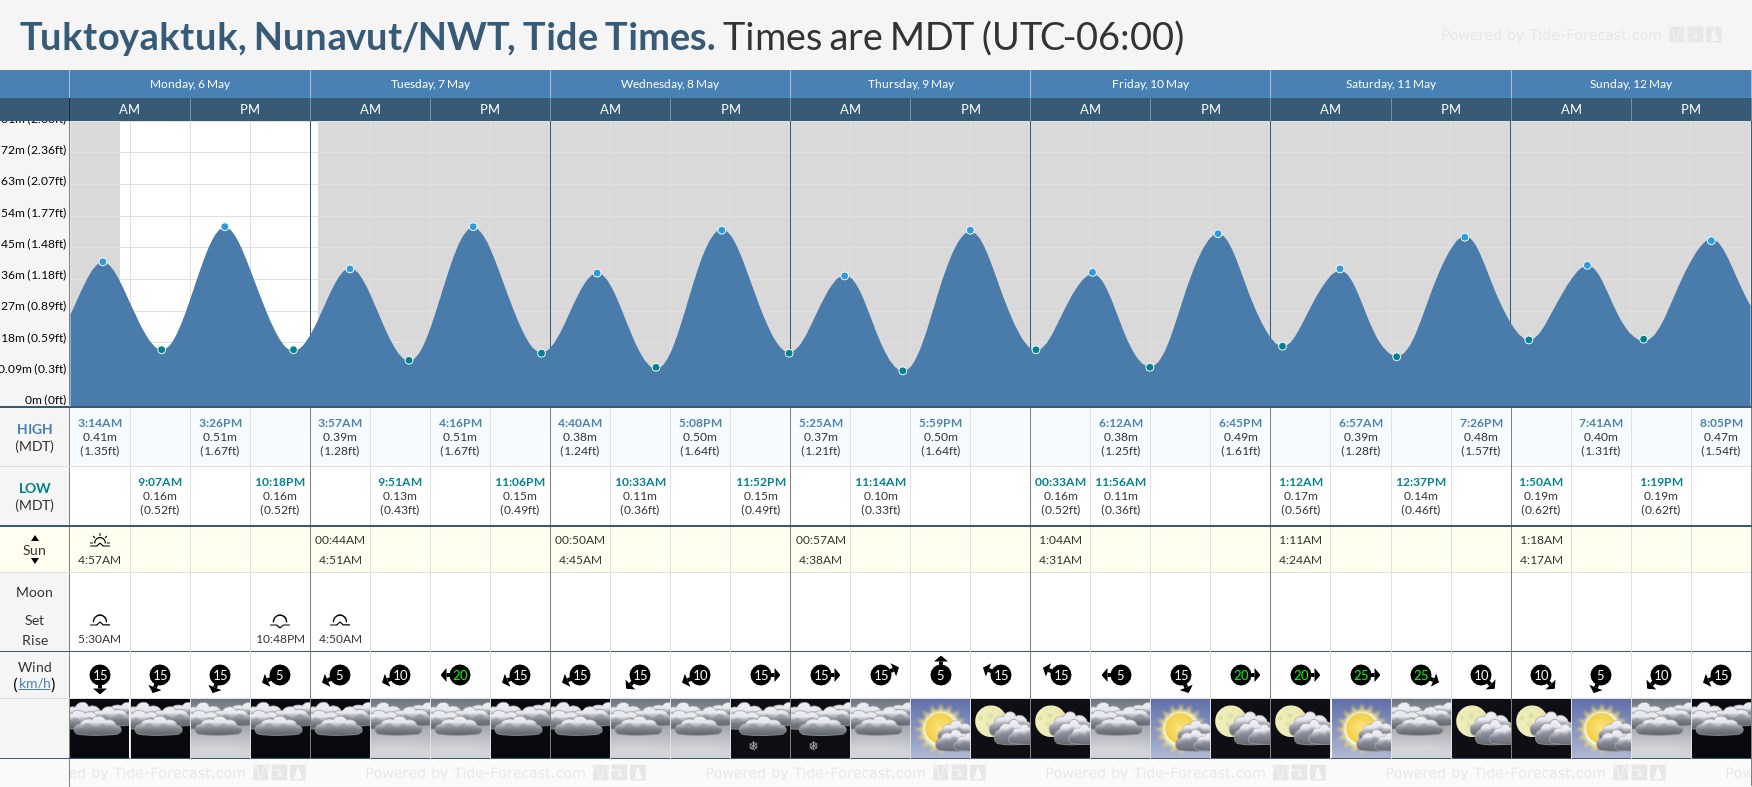 Tuktoyaktuk, Nunavut/NWT Tide Chart including high and low tide times for the next 7 days